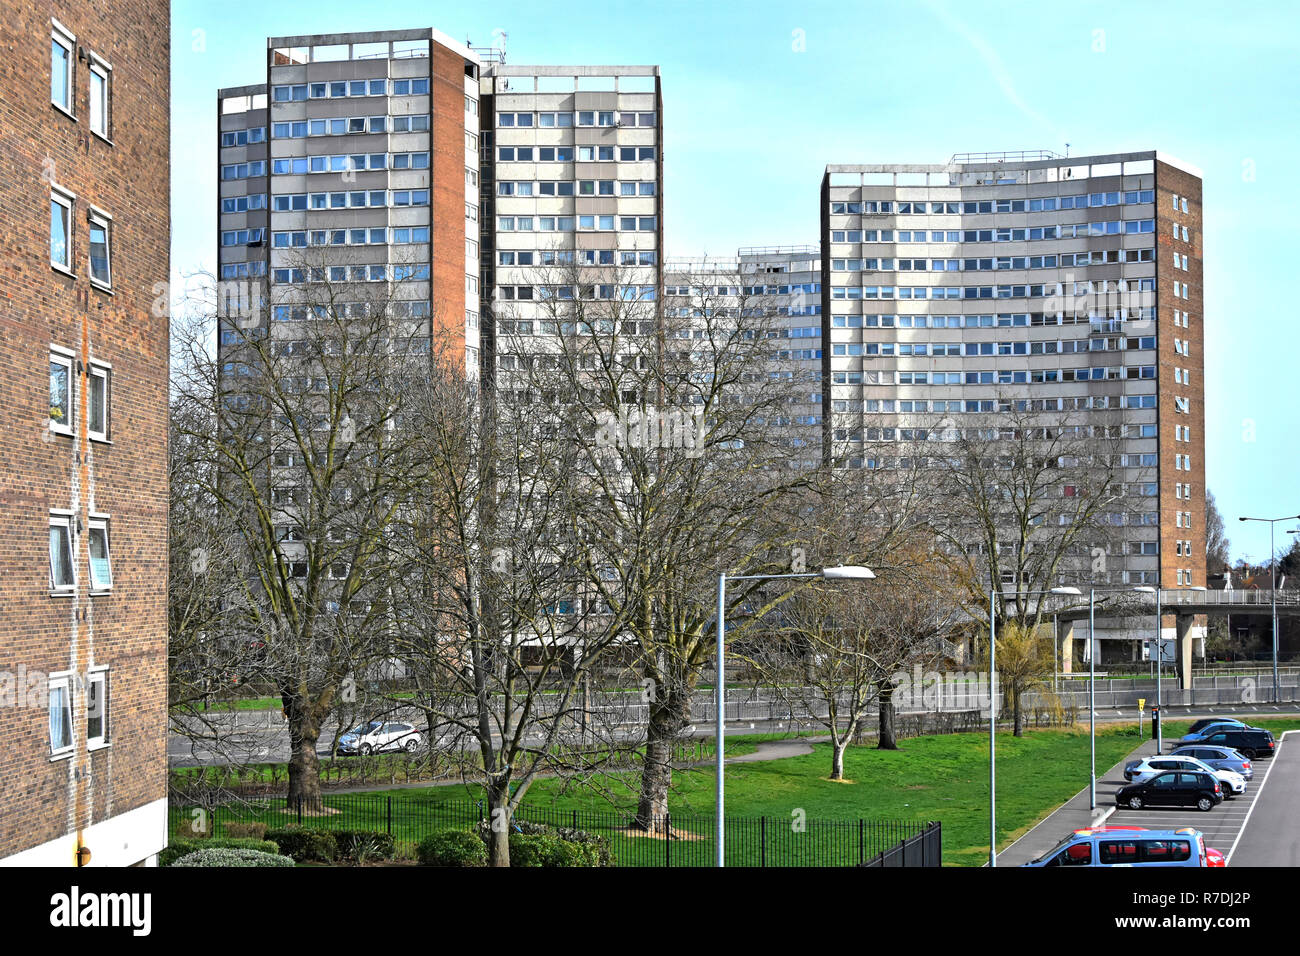 Multi Storey high rise blocks homes & flats part of council housing estate beyond winter trees close to town centre Southend on Sea Essex England UK Stock Photo